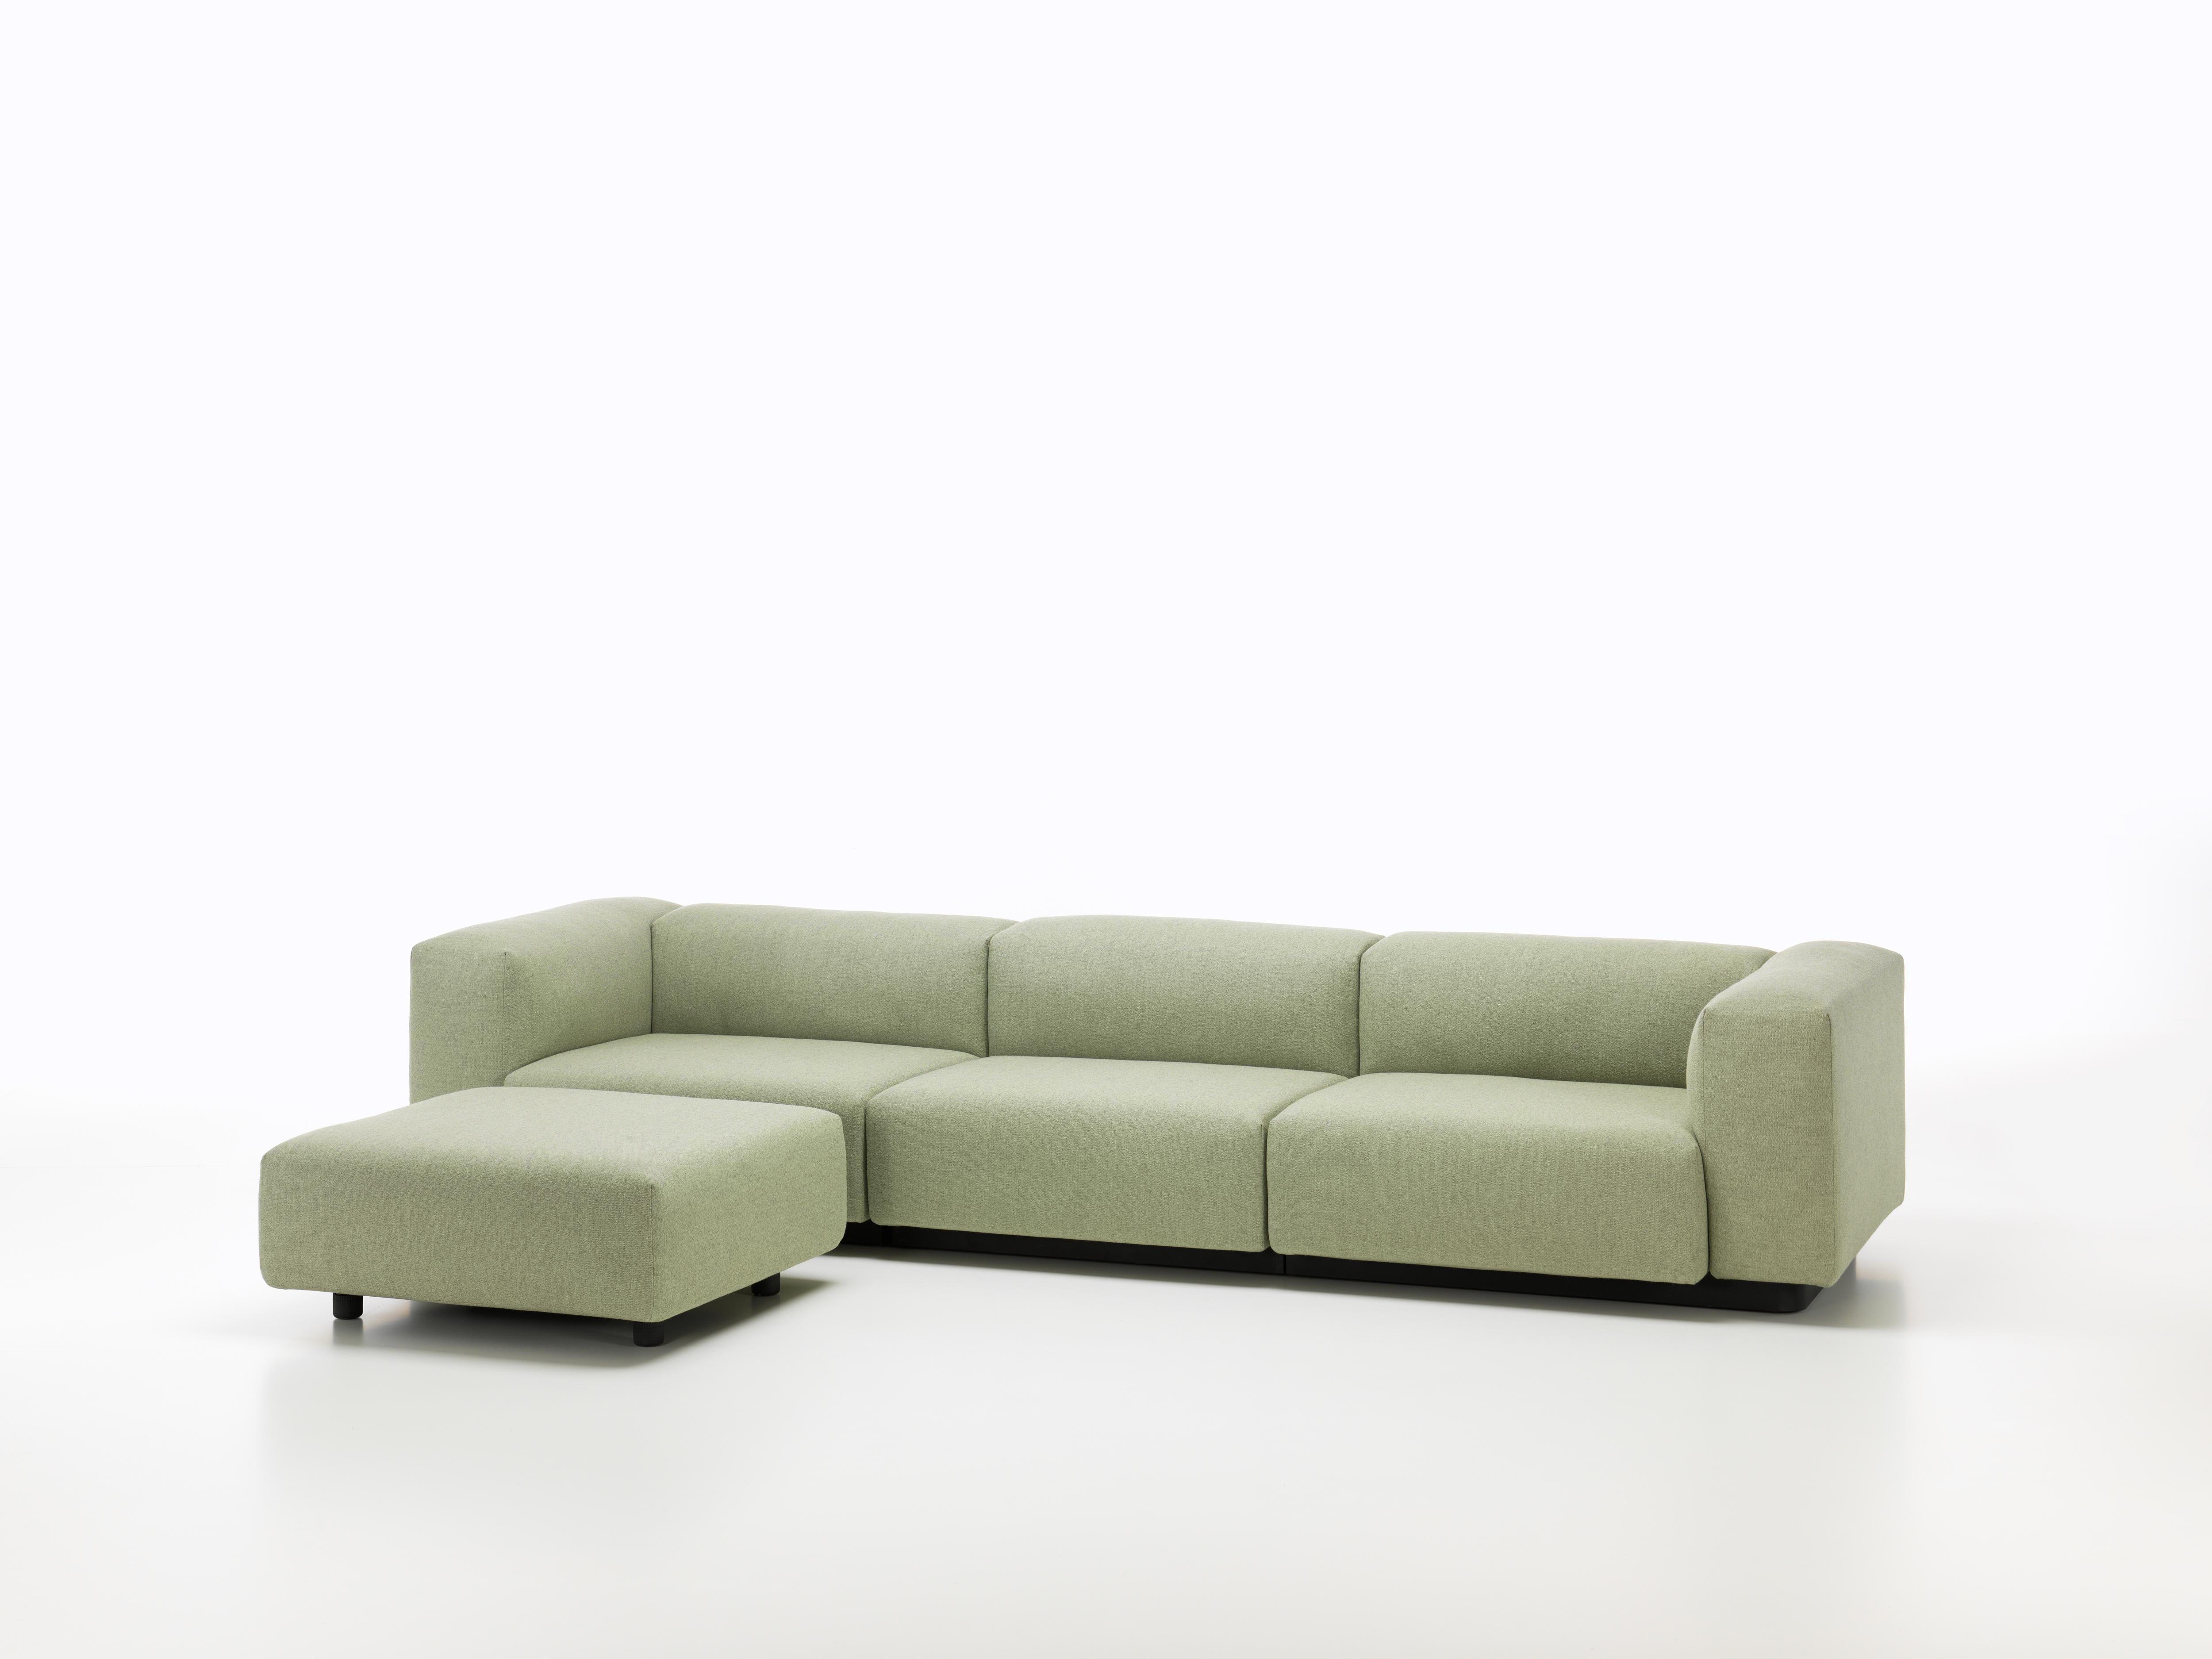 These items are only available in the United States.

The Soft Modular sofa is Jasper Morrison‘s updated interpretation of what has become a modern Classic: the low-slung modular sofa with a decidedly horizontal emphasis. Uniting carefully